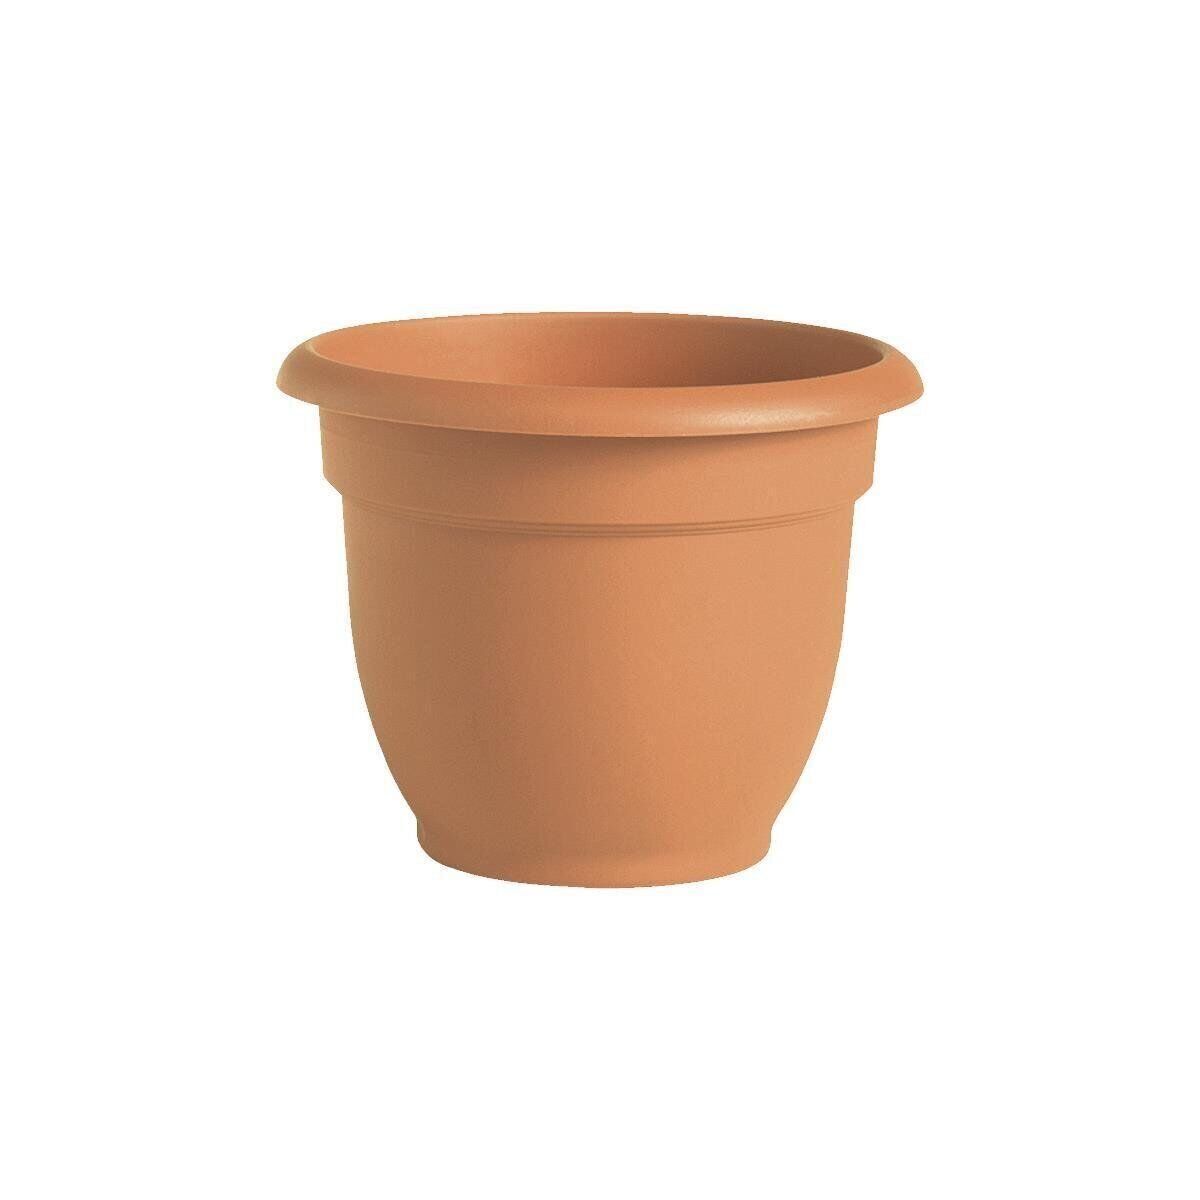 6 Inches Sturdy Clay Planter